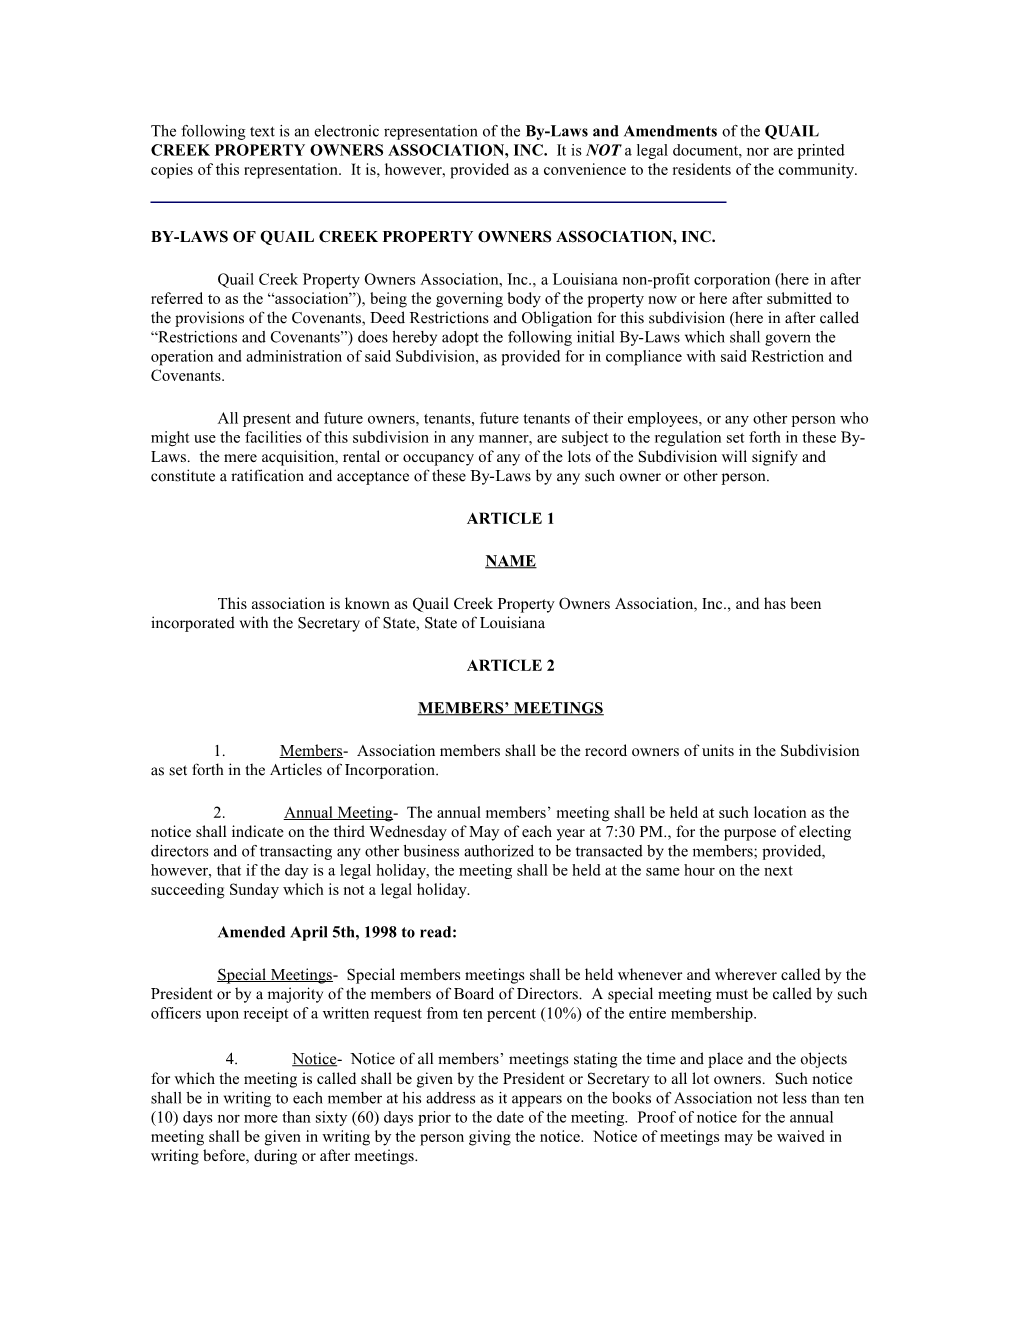 The Following Text Is an Electronic Representation of the By-Laws and Amendments of The